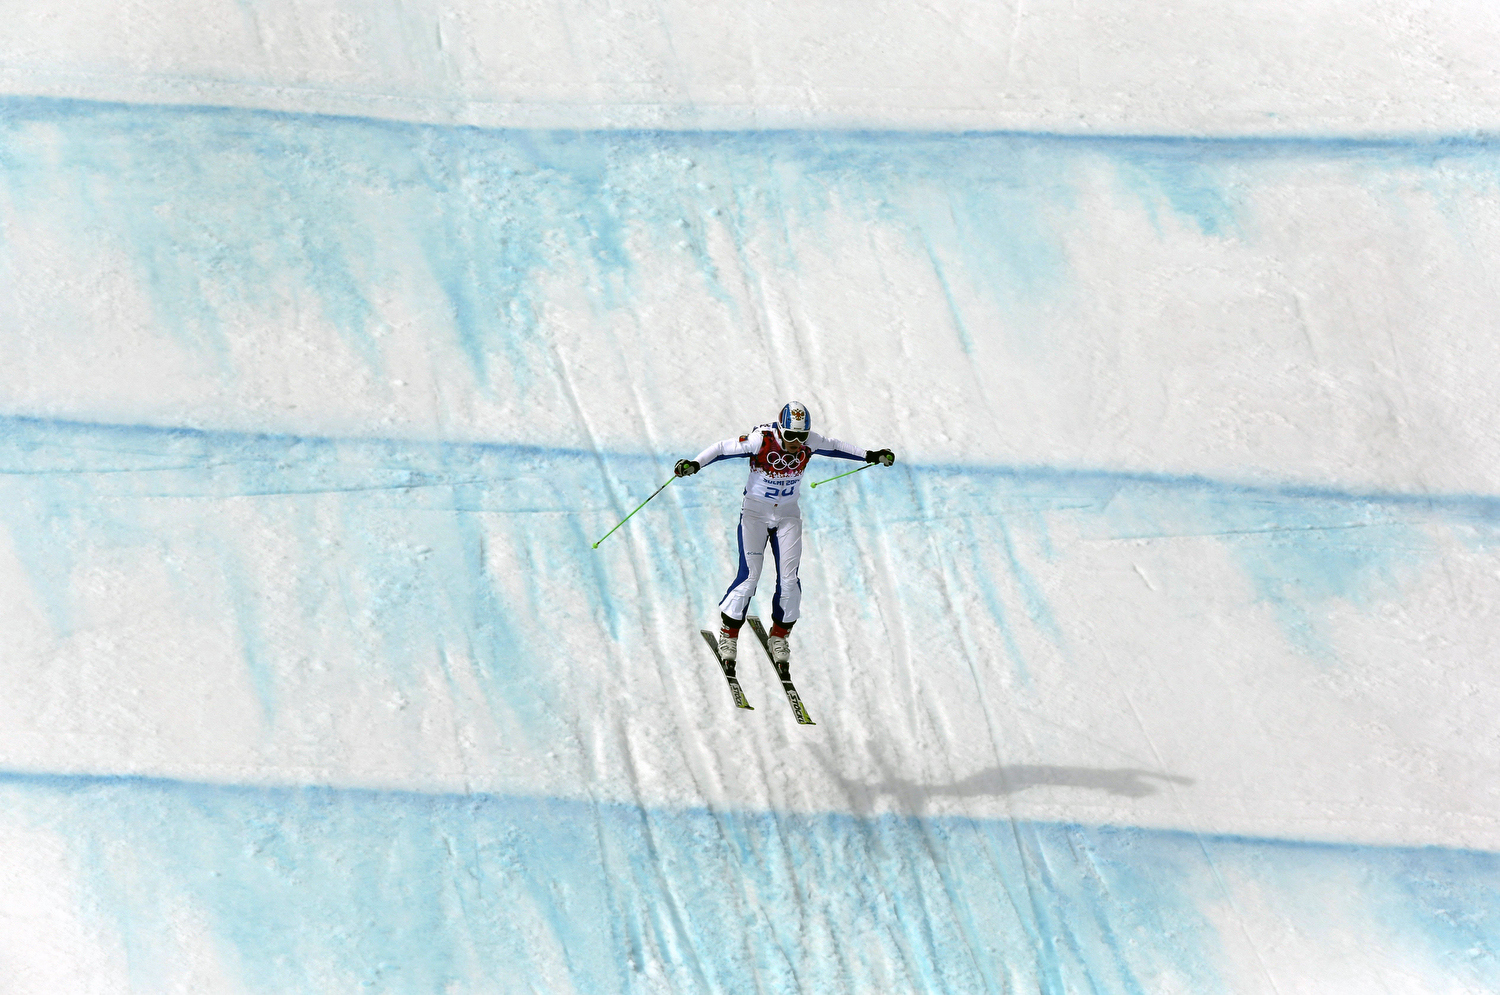 Russia's Igor Korotkov lands from a jump during men's ski cross seeding runs at the Rosa Khutor Extreme Park.